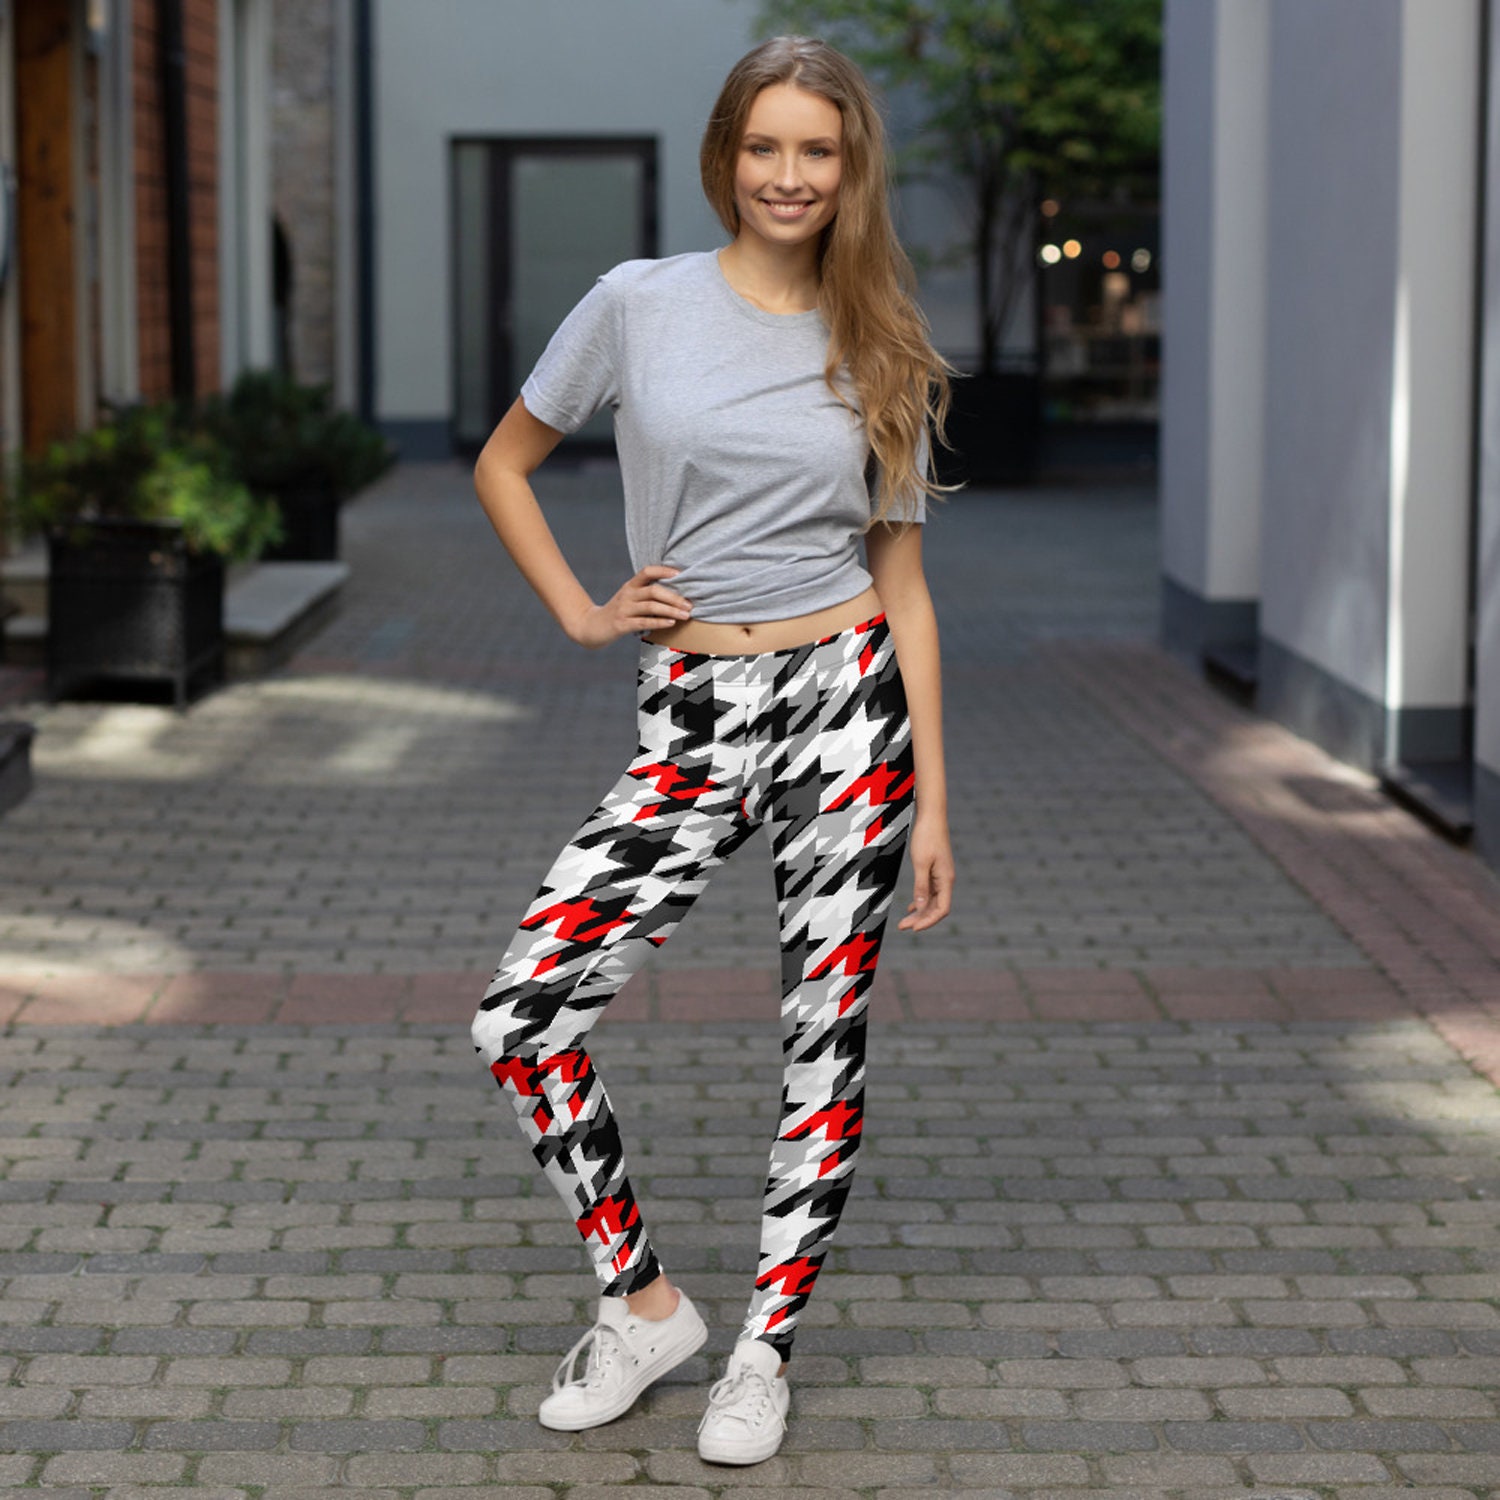 Houndstooth Sports Leggings for Women Printed Hounds Tooth Pattern